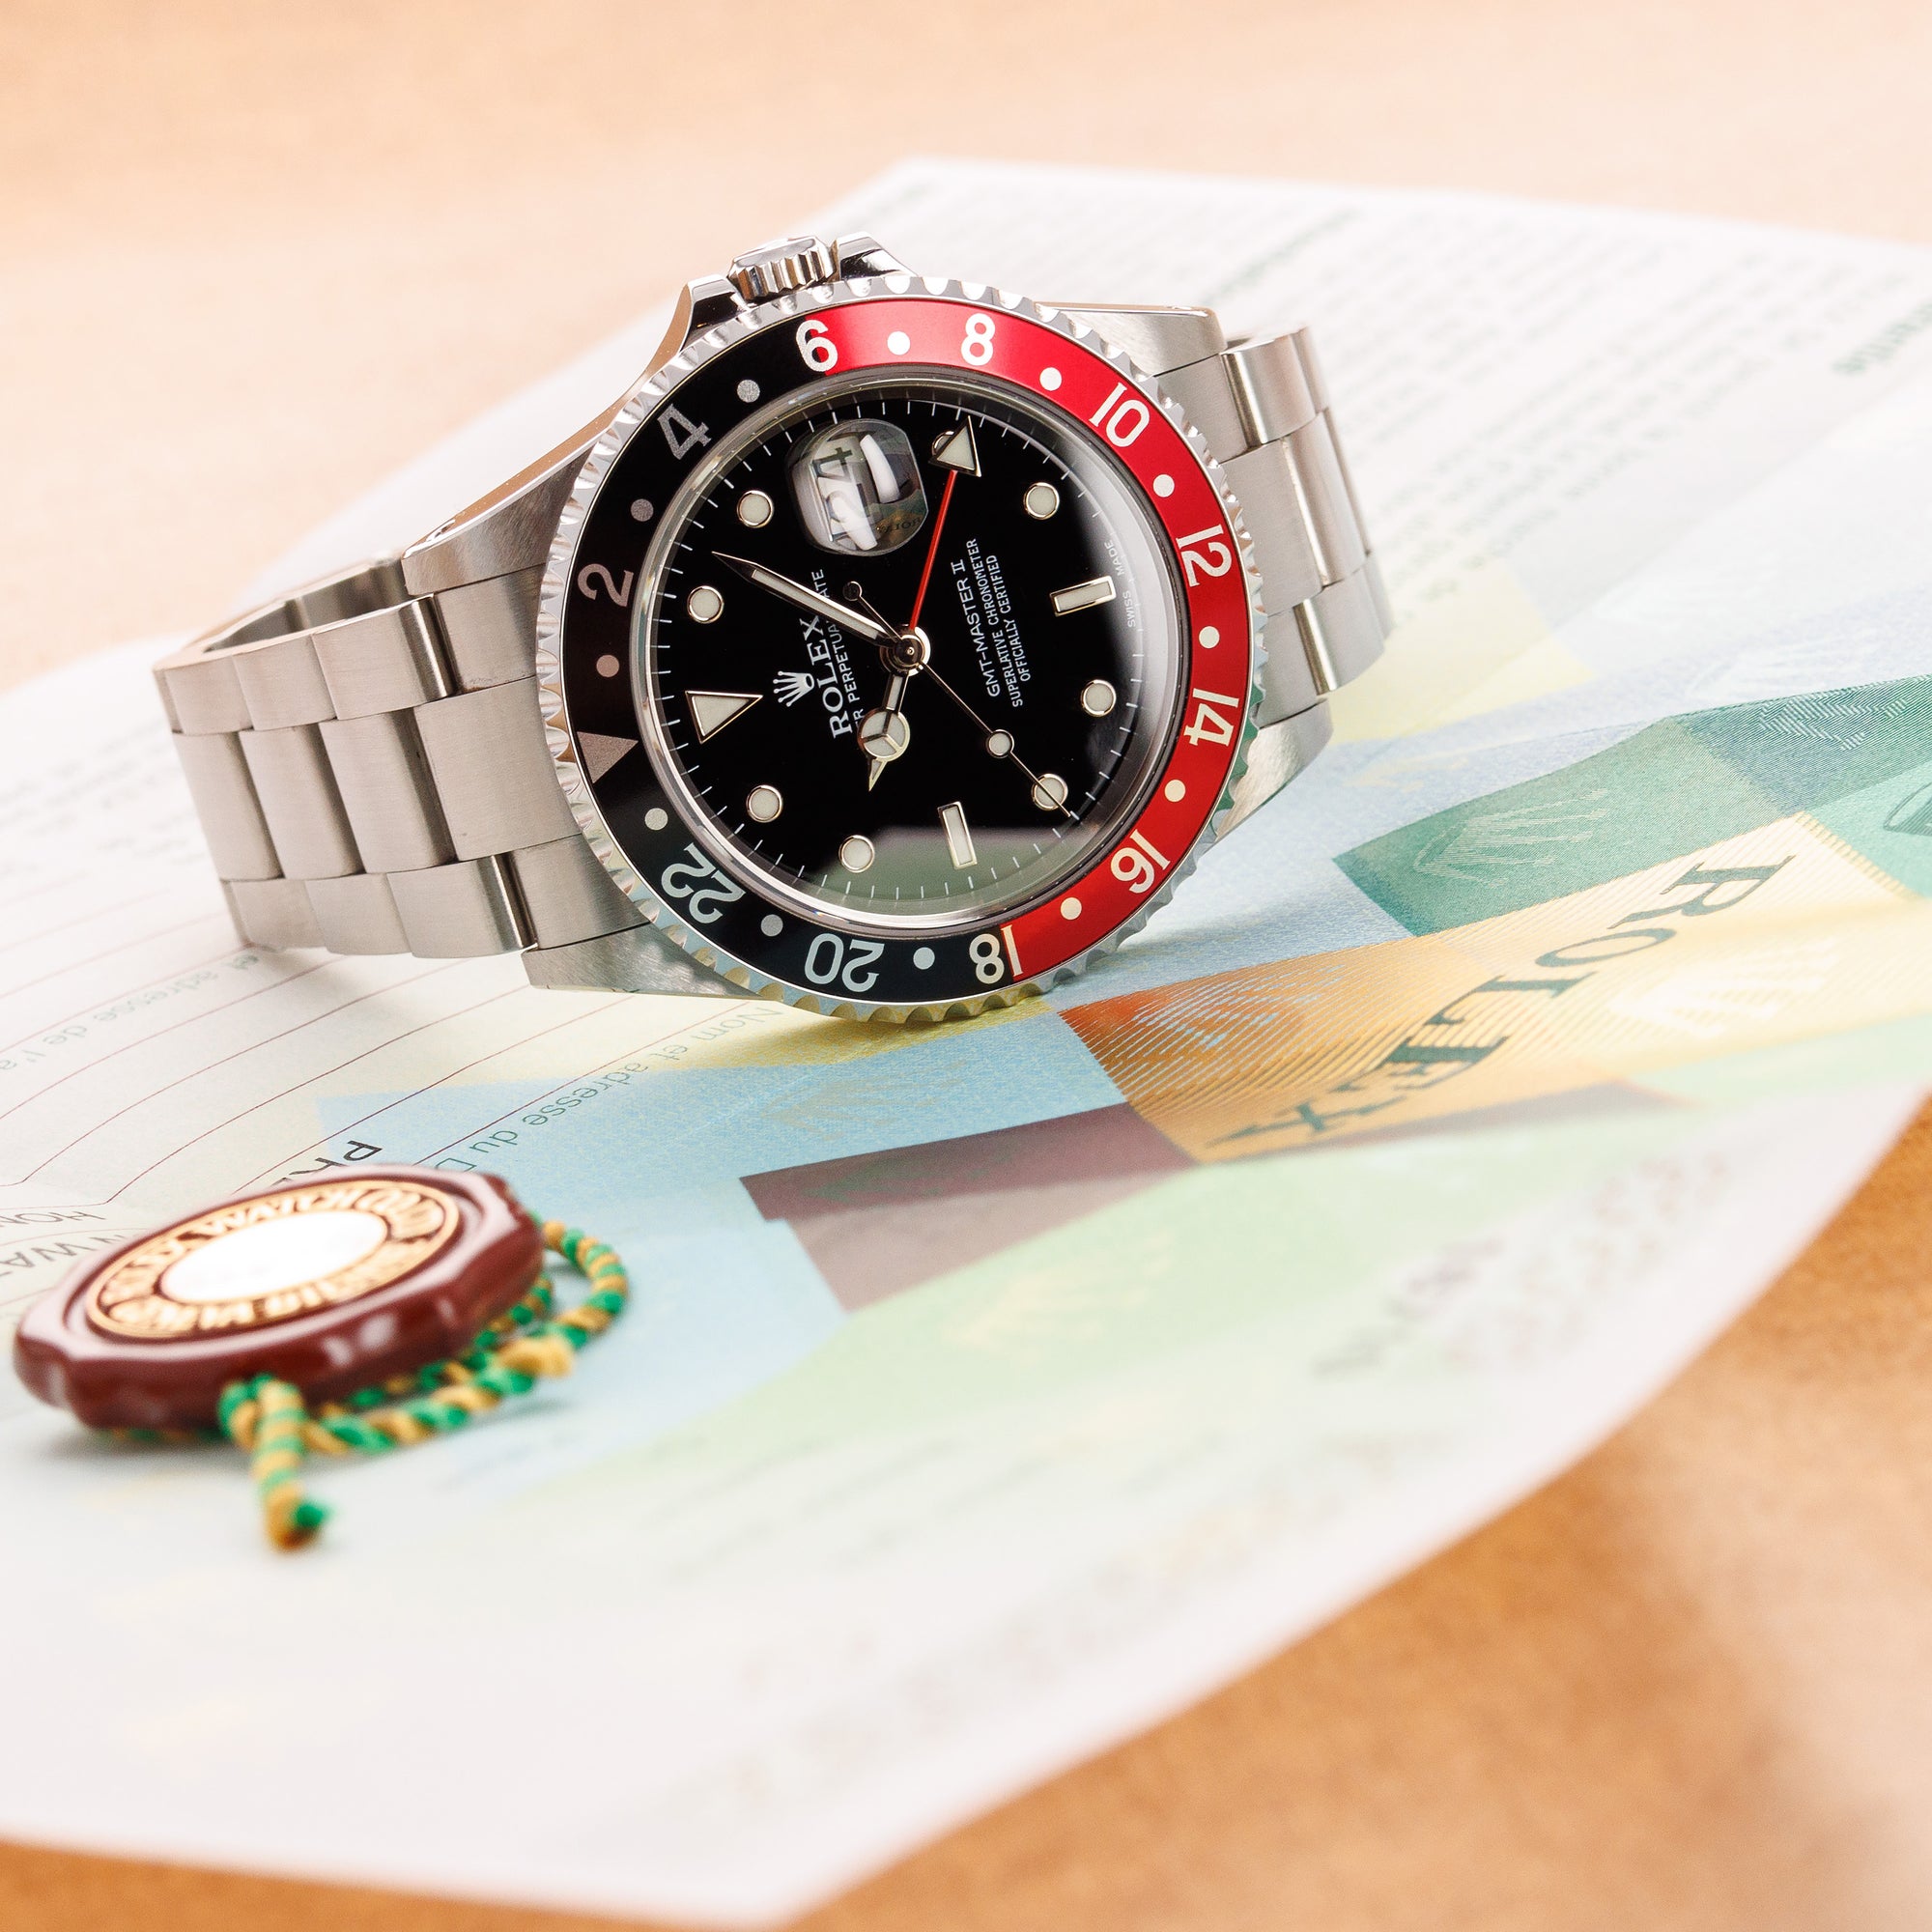 Rolex - Rolex Steel GMT Master II Ref. 16710 in Like New Condition - The Keystone Watches